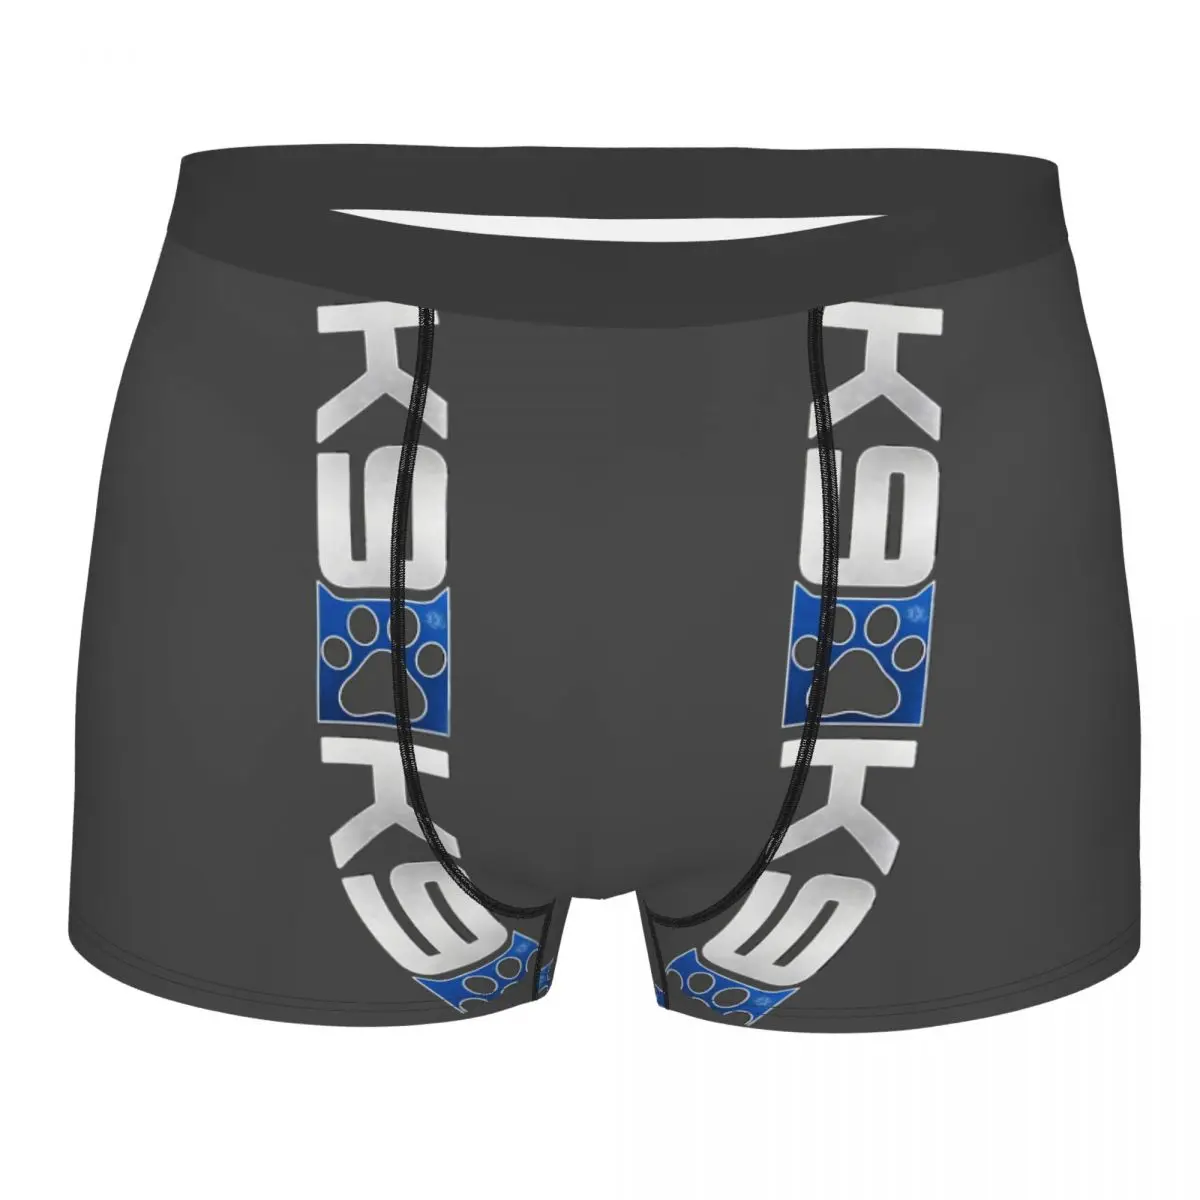 

K9 A Parody Men Boxer Briefs Underpants Mass Effect Game Highly Breathable High Quality Sexy Shorts Gift Idea